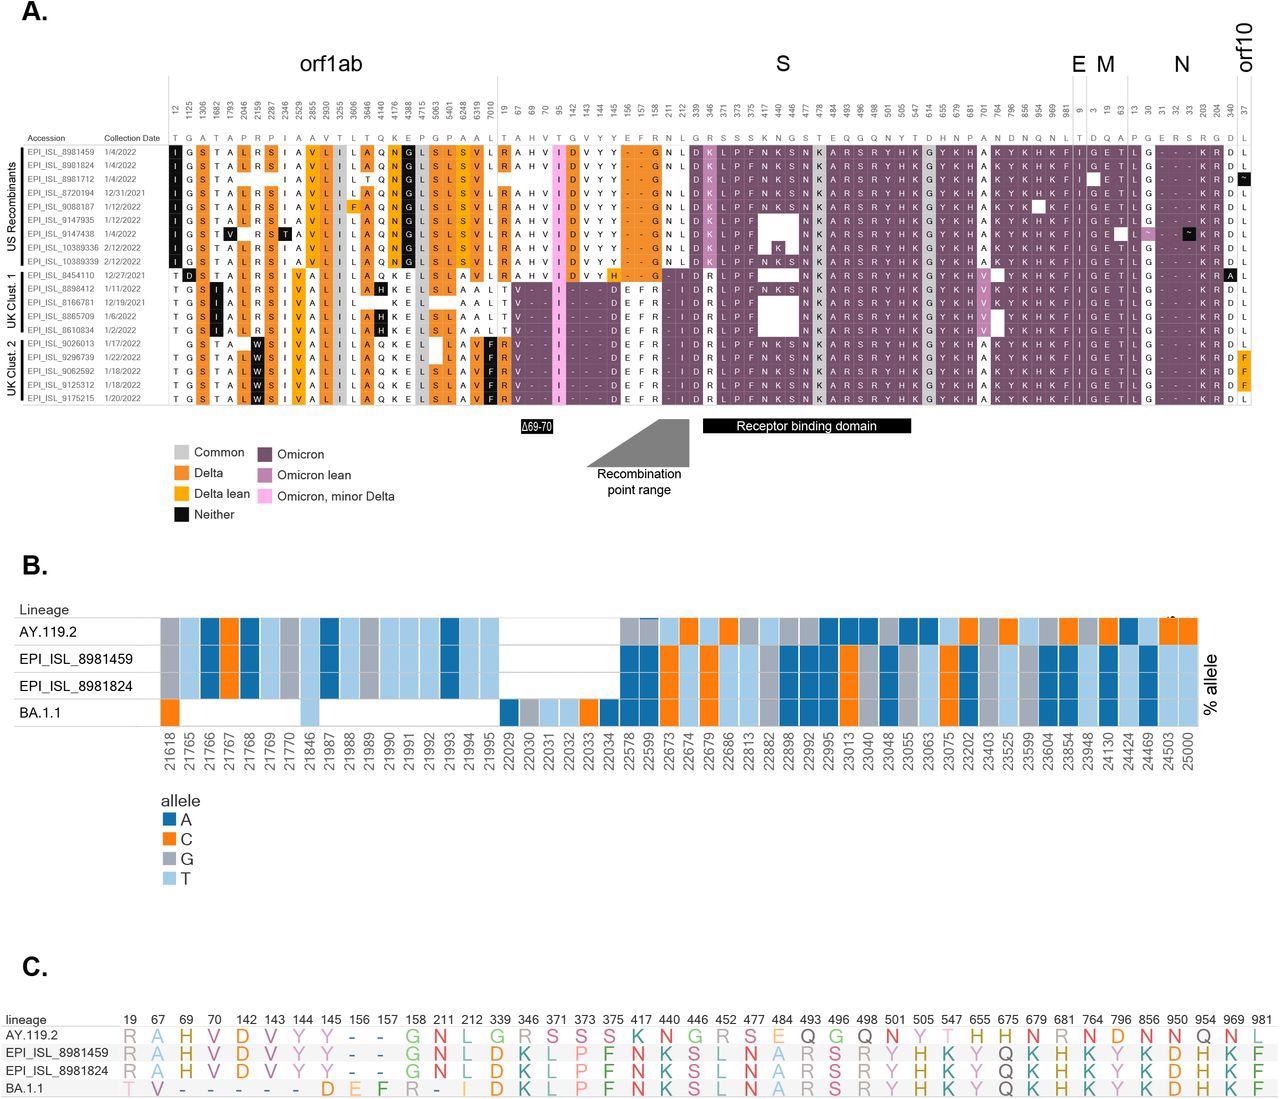 Composition of candidate recombinant virus genomes (A) Amino acid profiles of putative recombinants in the United States and the United Kingdom. Delta-associated mutations are shown in orange and omicron-associated mutations are shown in purple (see Appendix). Distinct clusters are shown, as sequences from the US appear to have recombination within S, while UK samples from two clusters show recombination before S. The BA.1.1 (Omicron) deletion associated with “S-gene target failure” (Δ69-70), the receptor-binding domain, and the range containing the recombination location is noted. (B) Bar chart illustrating the proportion of reads supporting each SNV and deletion around the recombination site for a representative AY.119.2 (Delta) genome [EPI_ISL_6811176], recombinant [EPI_ISL_8981459, EPI_ISL_8981824], and a representative BA.1.1 (Omicron) genome [EPI_ISL_9351600]. Each bar shows the proportion of reads containing the given allele (colored by A, C, T, and G) at each position for each sample. White boxes denote deletions, variants are relative to Wuhan-Hu-1. (C) Amino acid profiles within S gene for the representative AY.119.2 (Delta), the candidate recombinants, and representative BA.1.1 (Omicron) specimens.